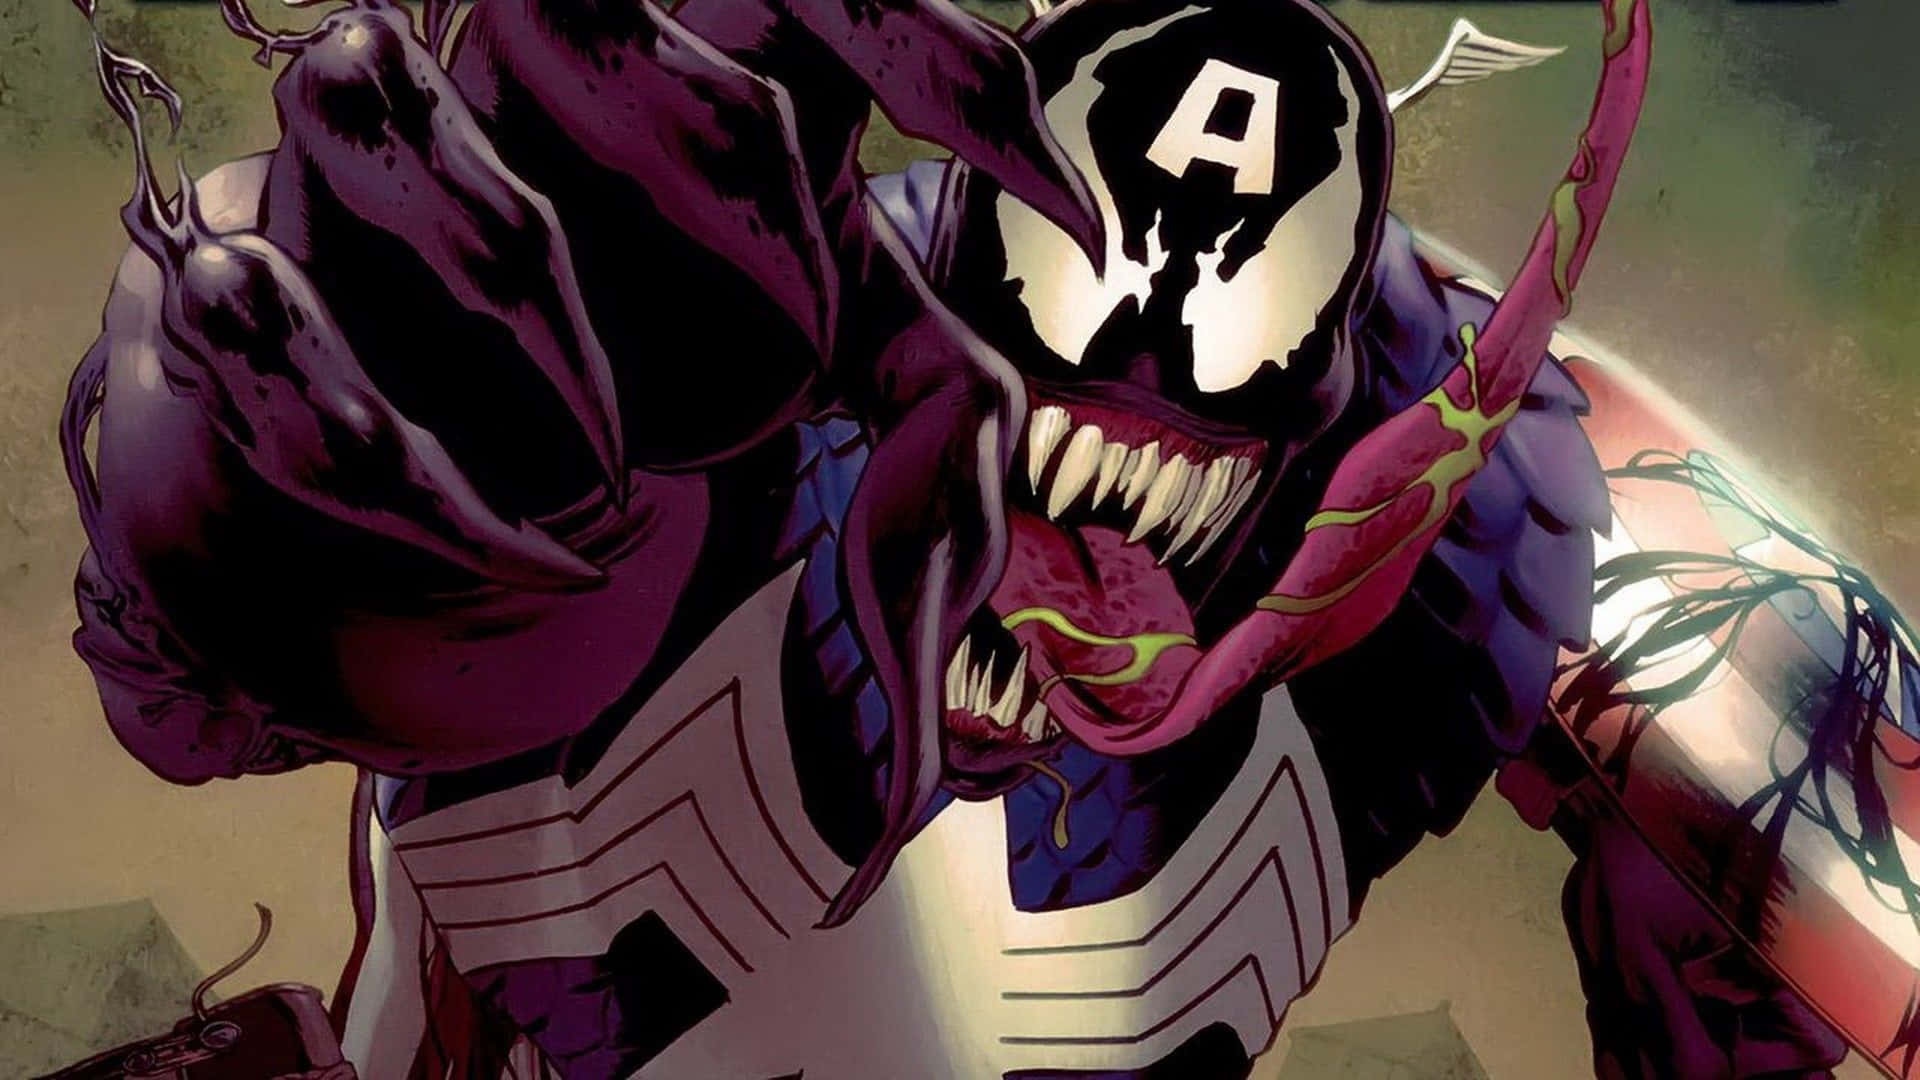 Venom Is Holding An American Flag Background